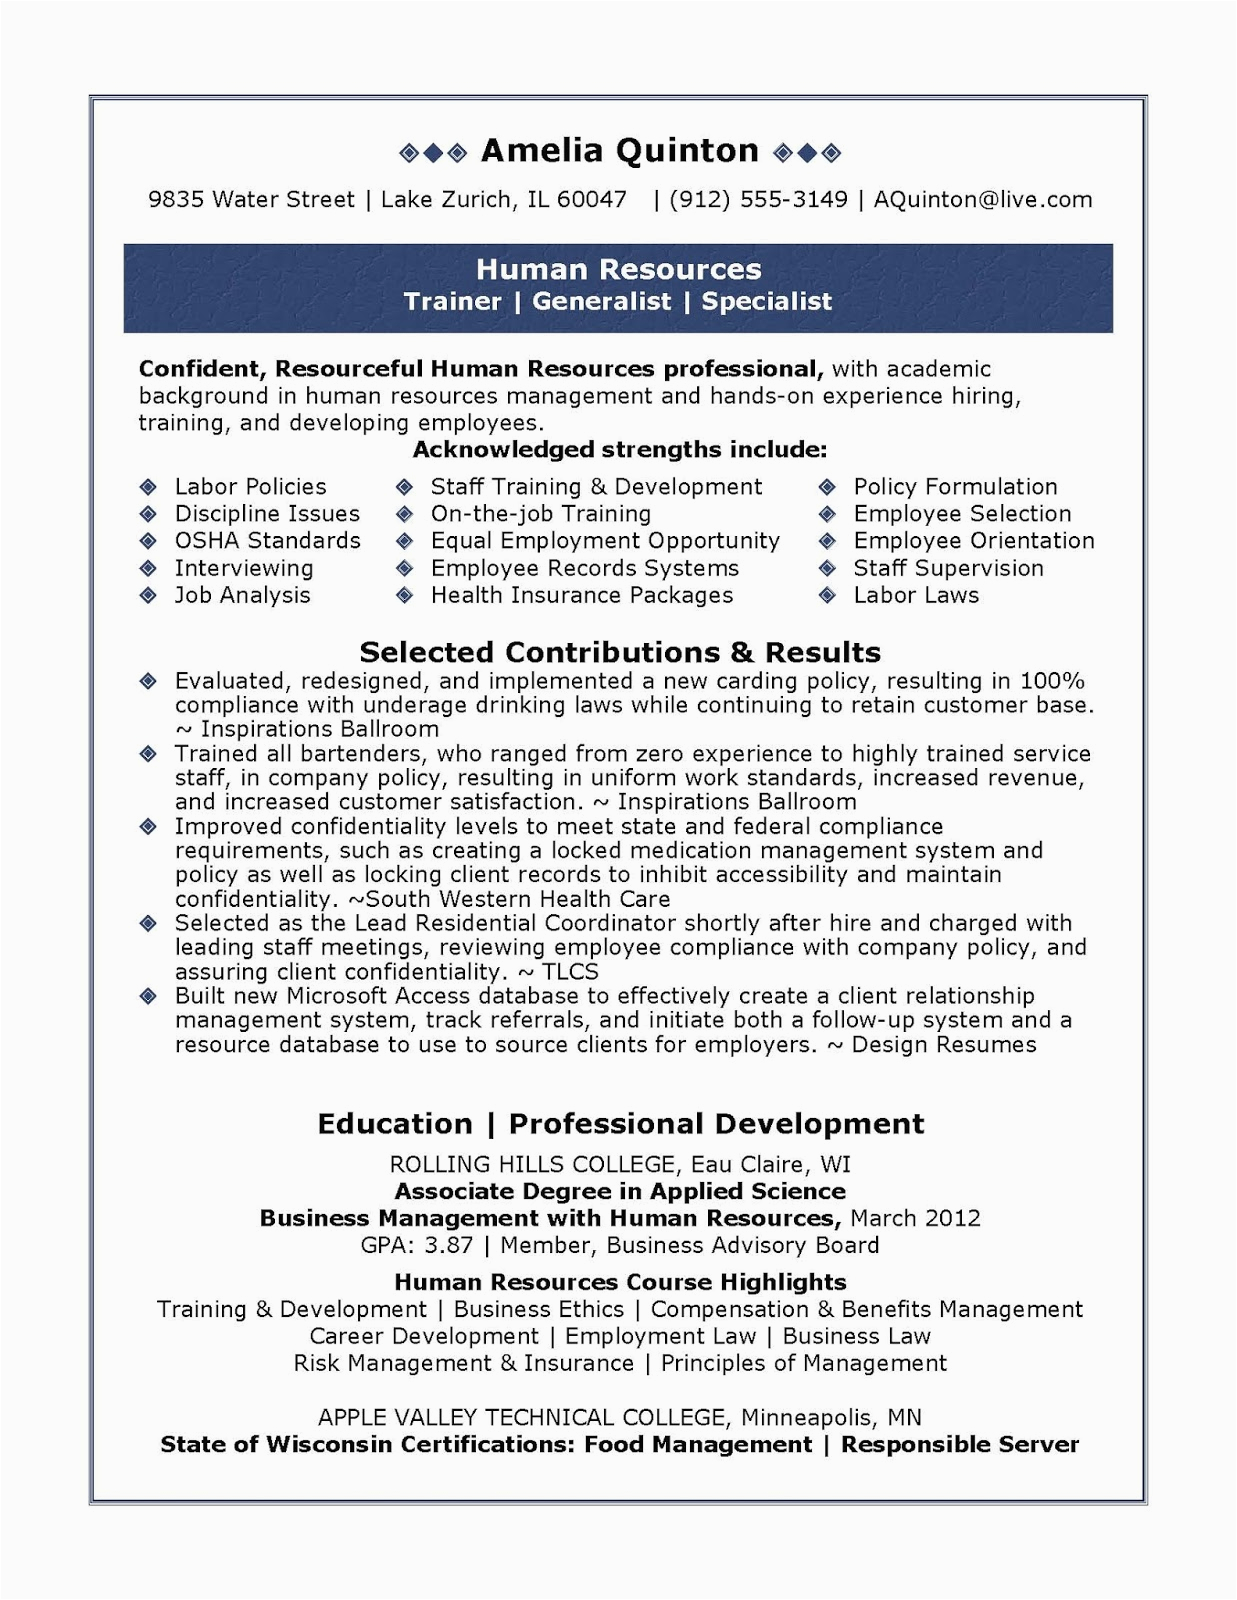 Human Resource Resume Examples and Samples Sample Human Resources Resume